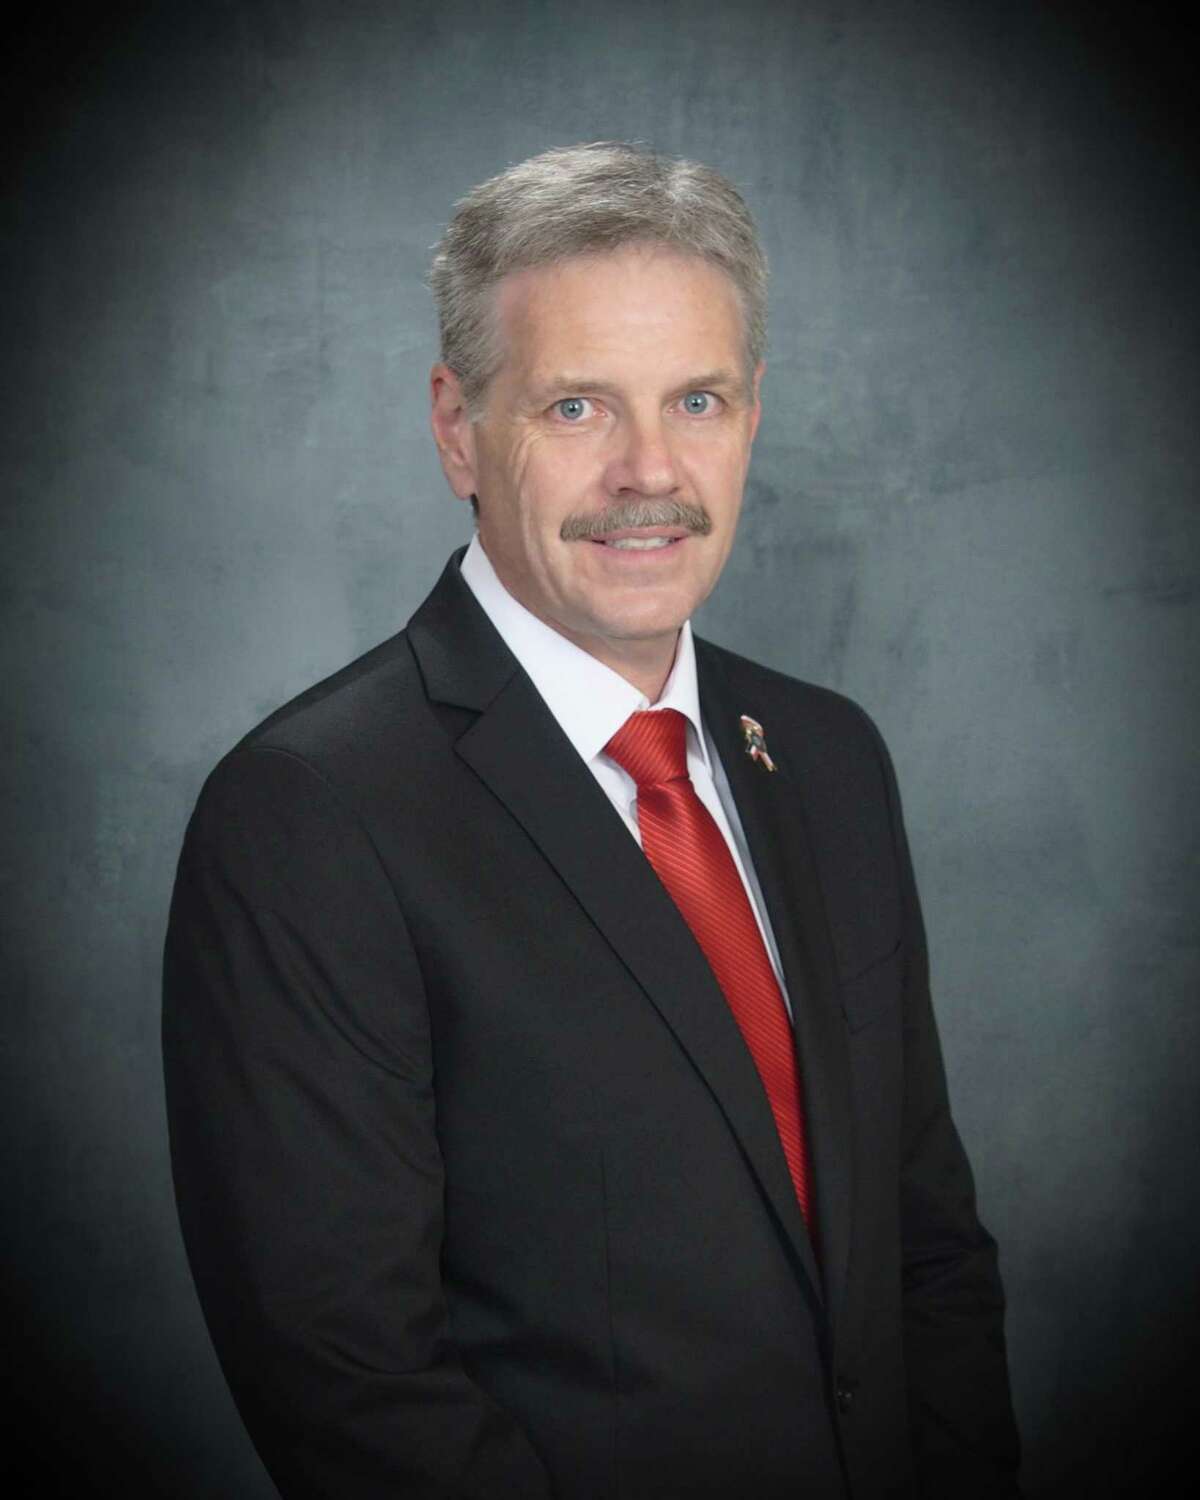 Jaime R. Taylor has been named the Sole Finalist in the Lamar University Presidential Search.